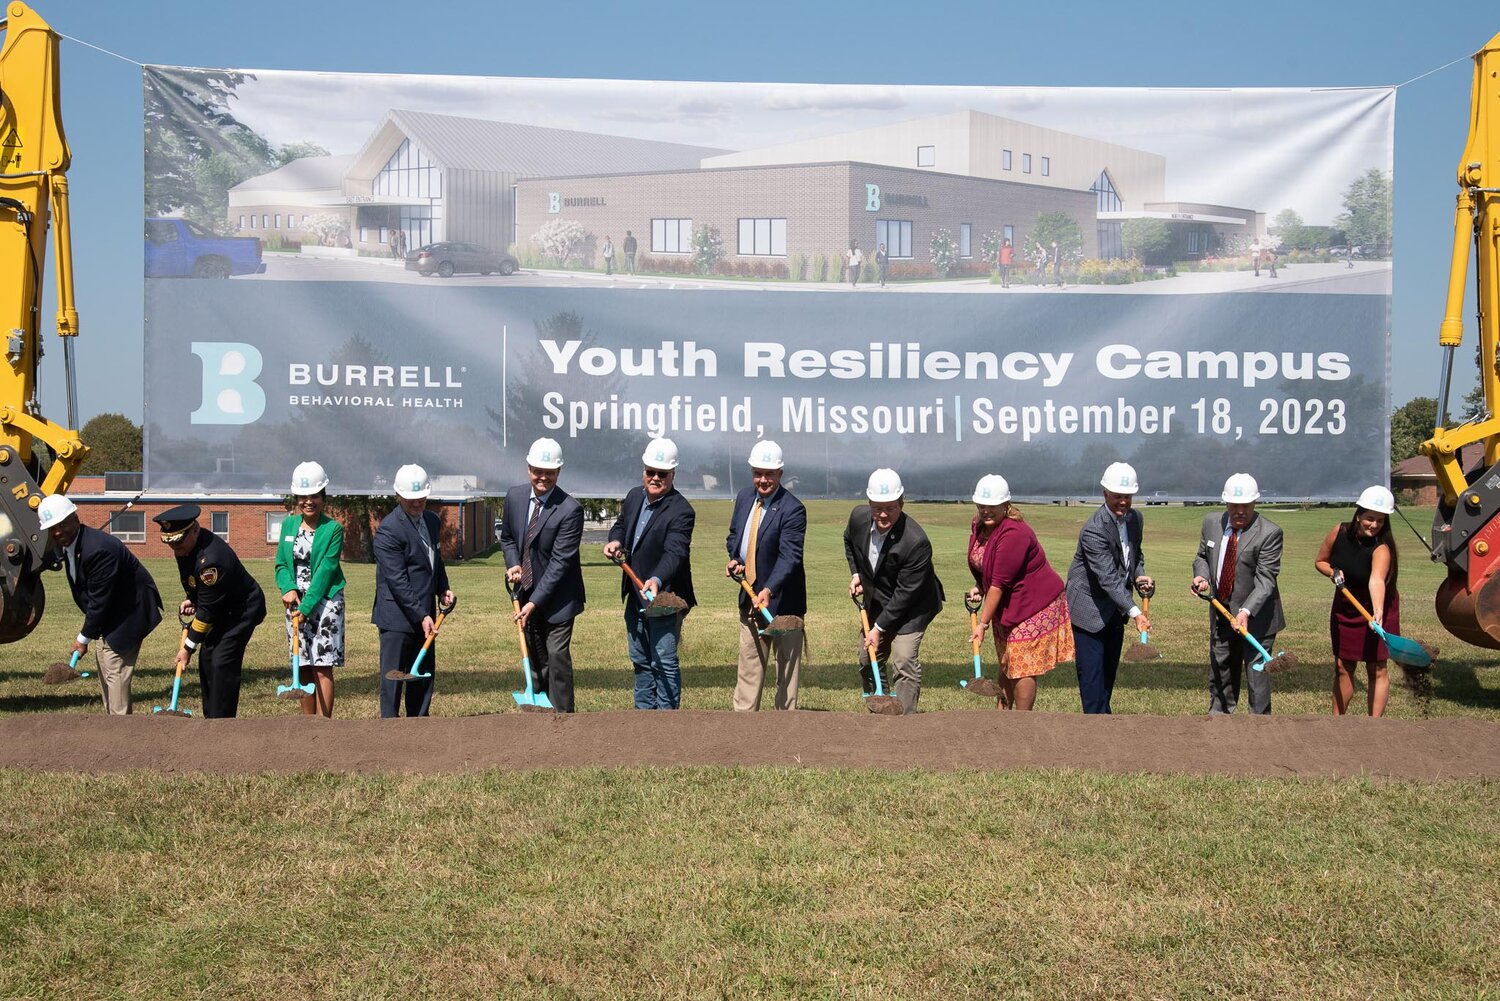 A groundbreaking ceremony is held on Monday for Burrell Behavioral Health's Youth Resiliency Campus.